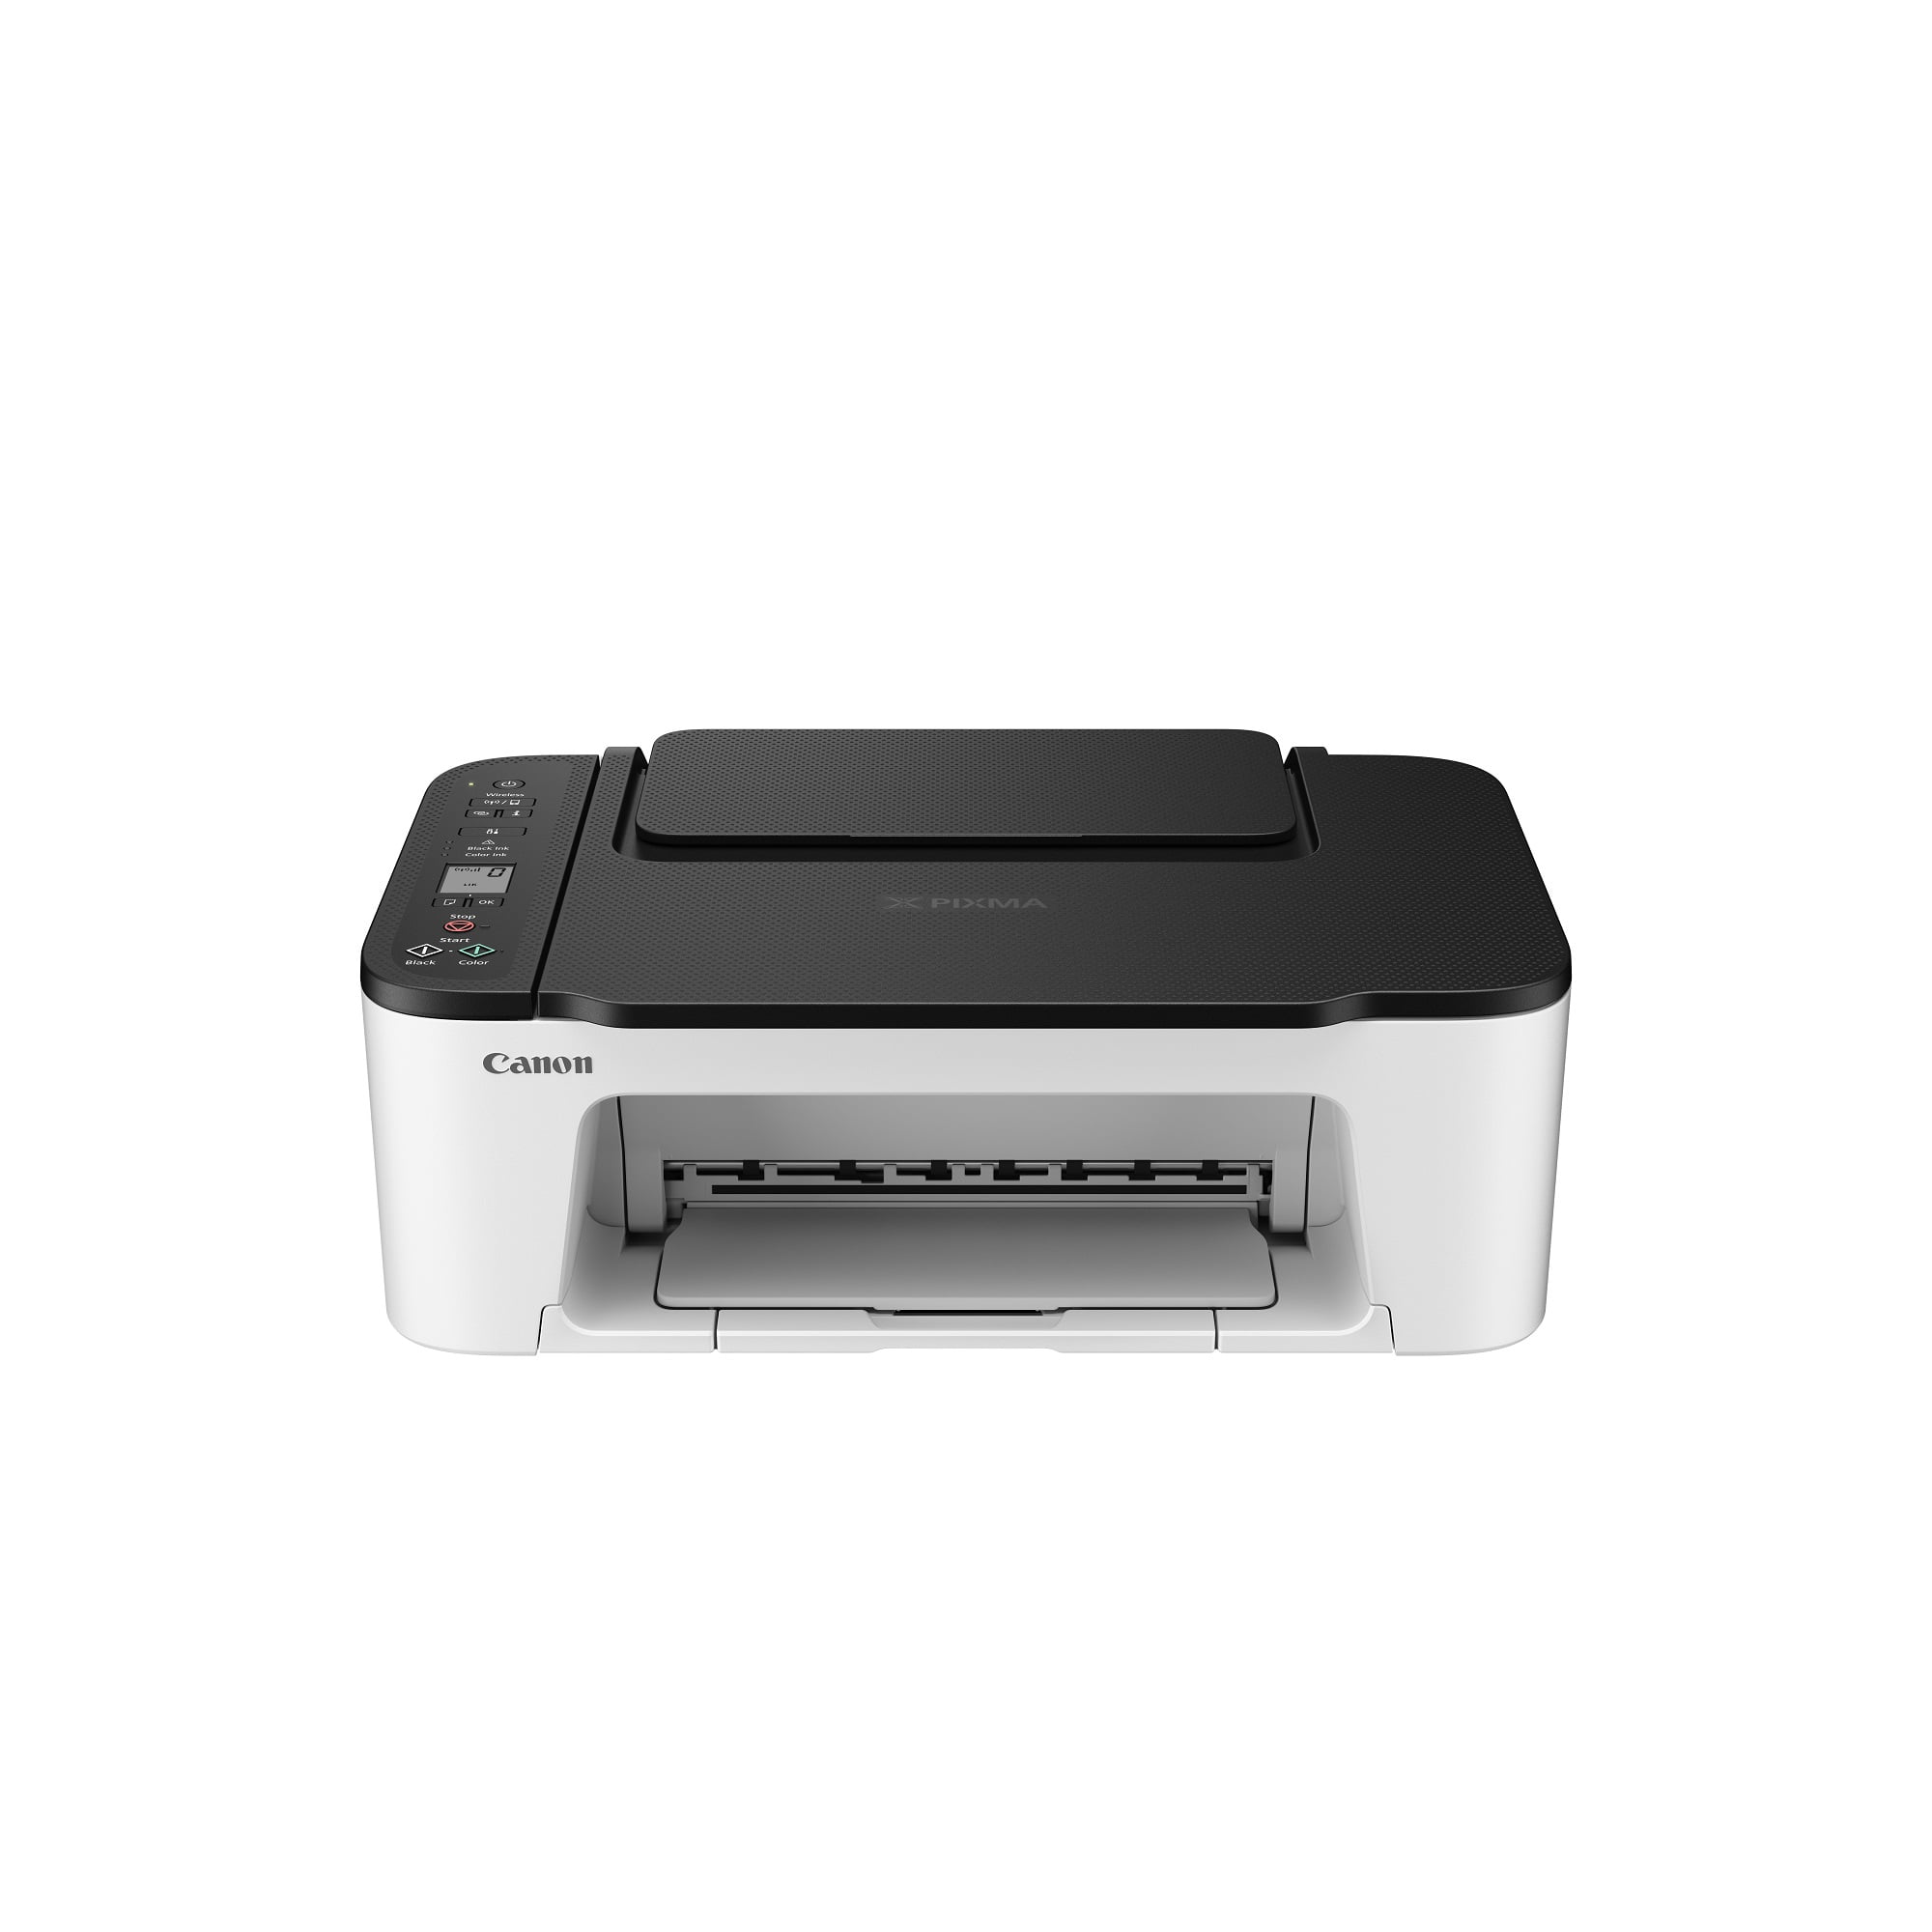 Works with Alexa One Size Google Cloud Print Canon PIXMA TS702 Wireless Single Function Printer R Print Service and Mopria Mobile Printing with AirPrint Black R 